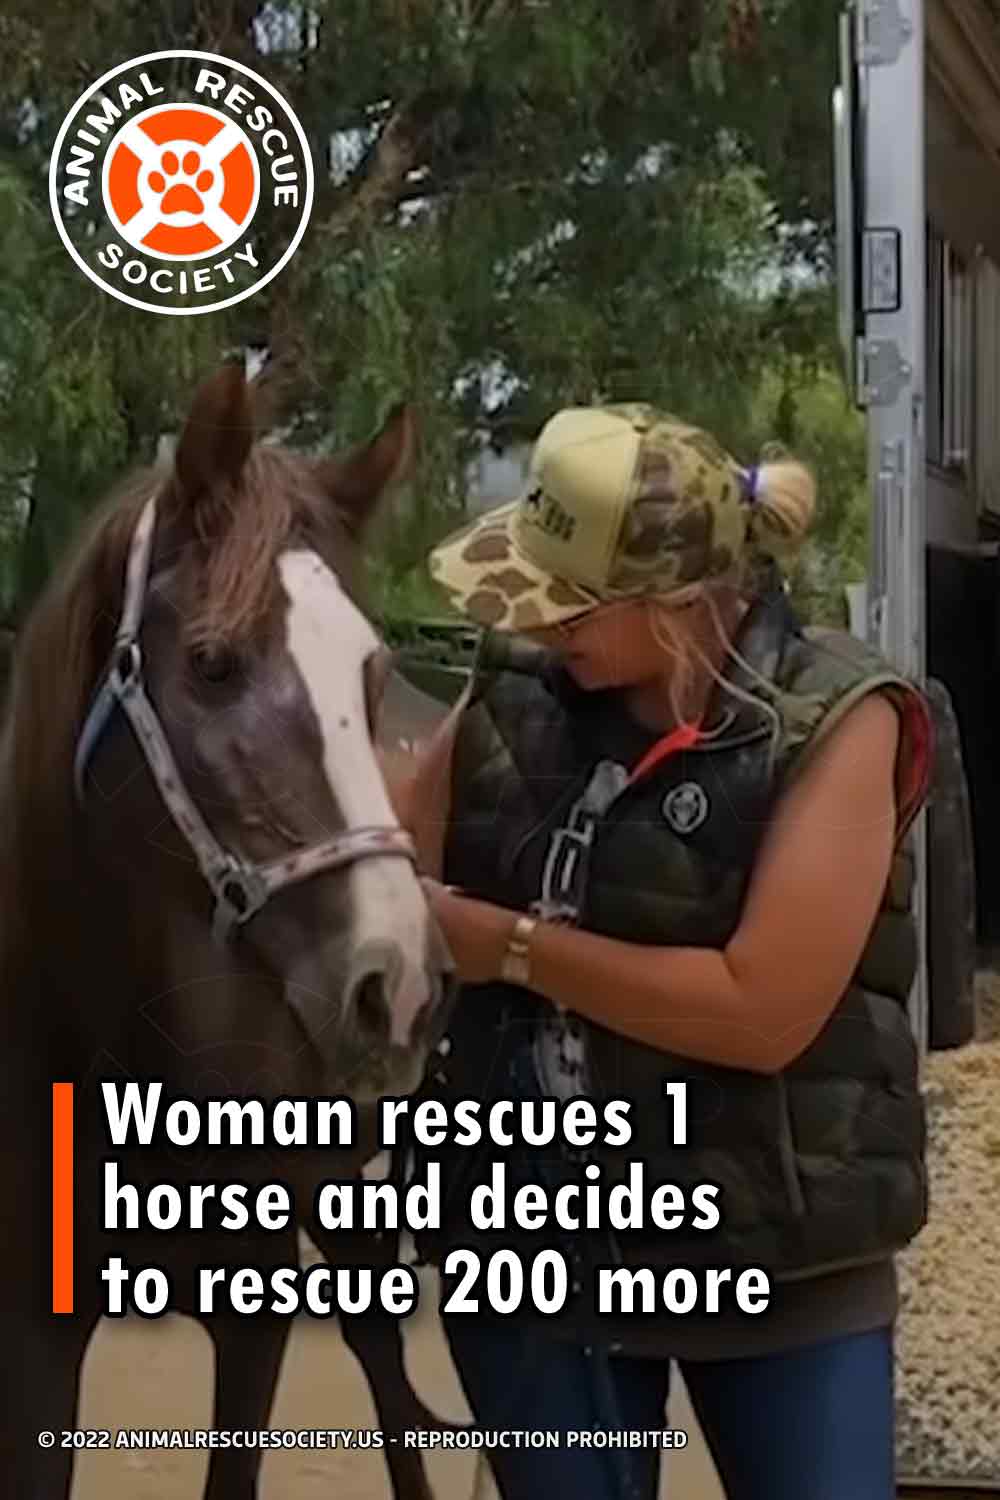 Woman rescues 1 horse and decides to rescue 200 more